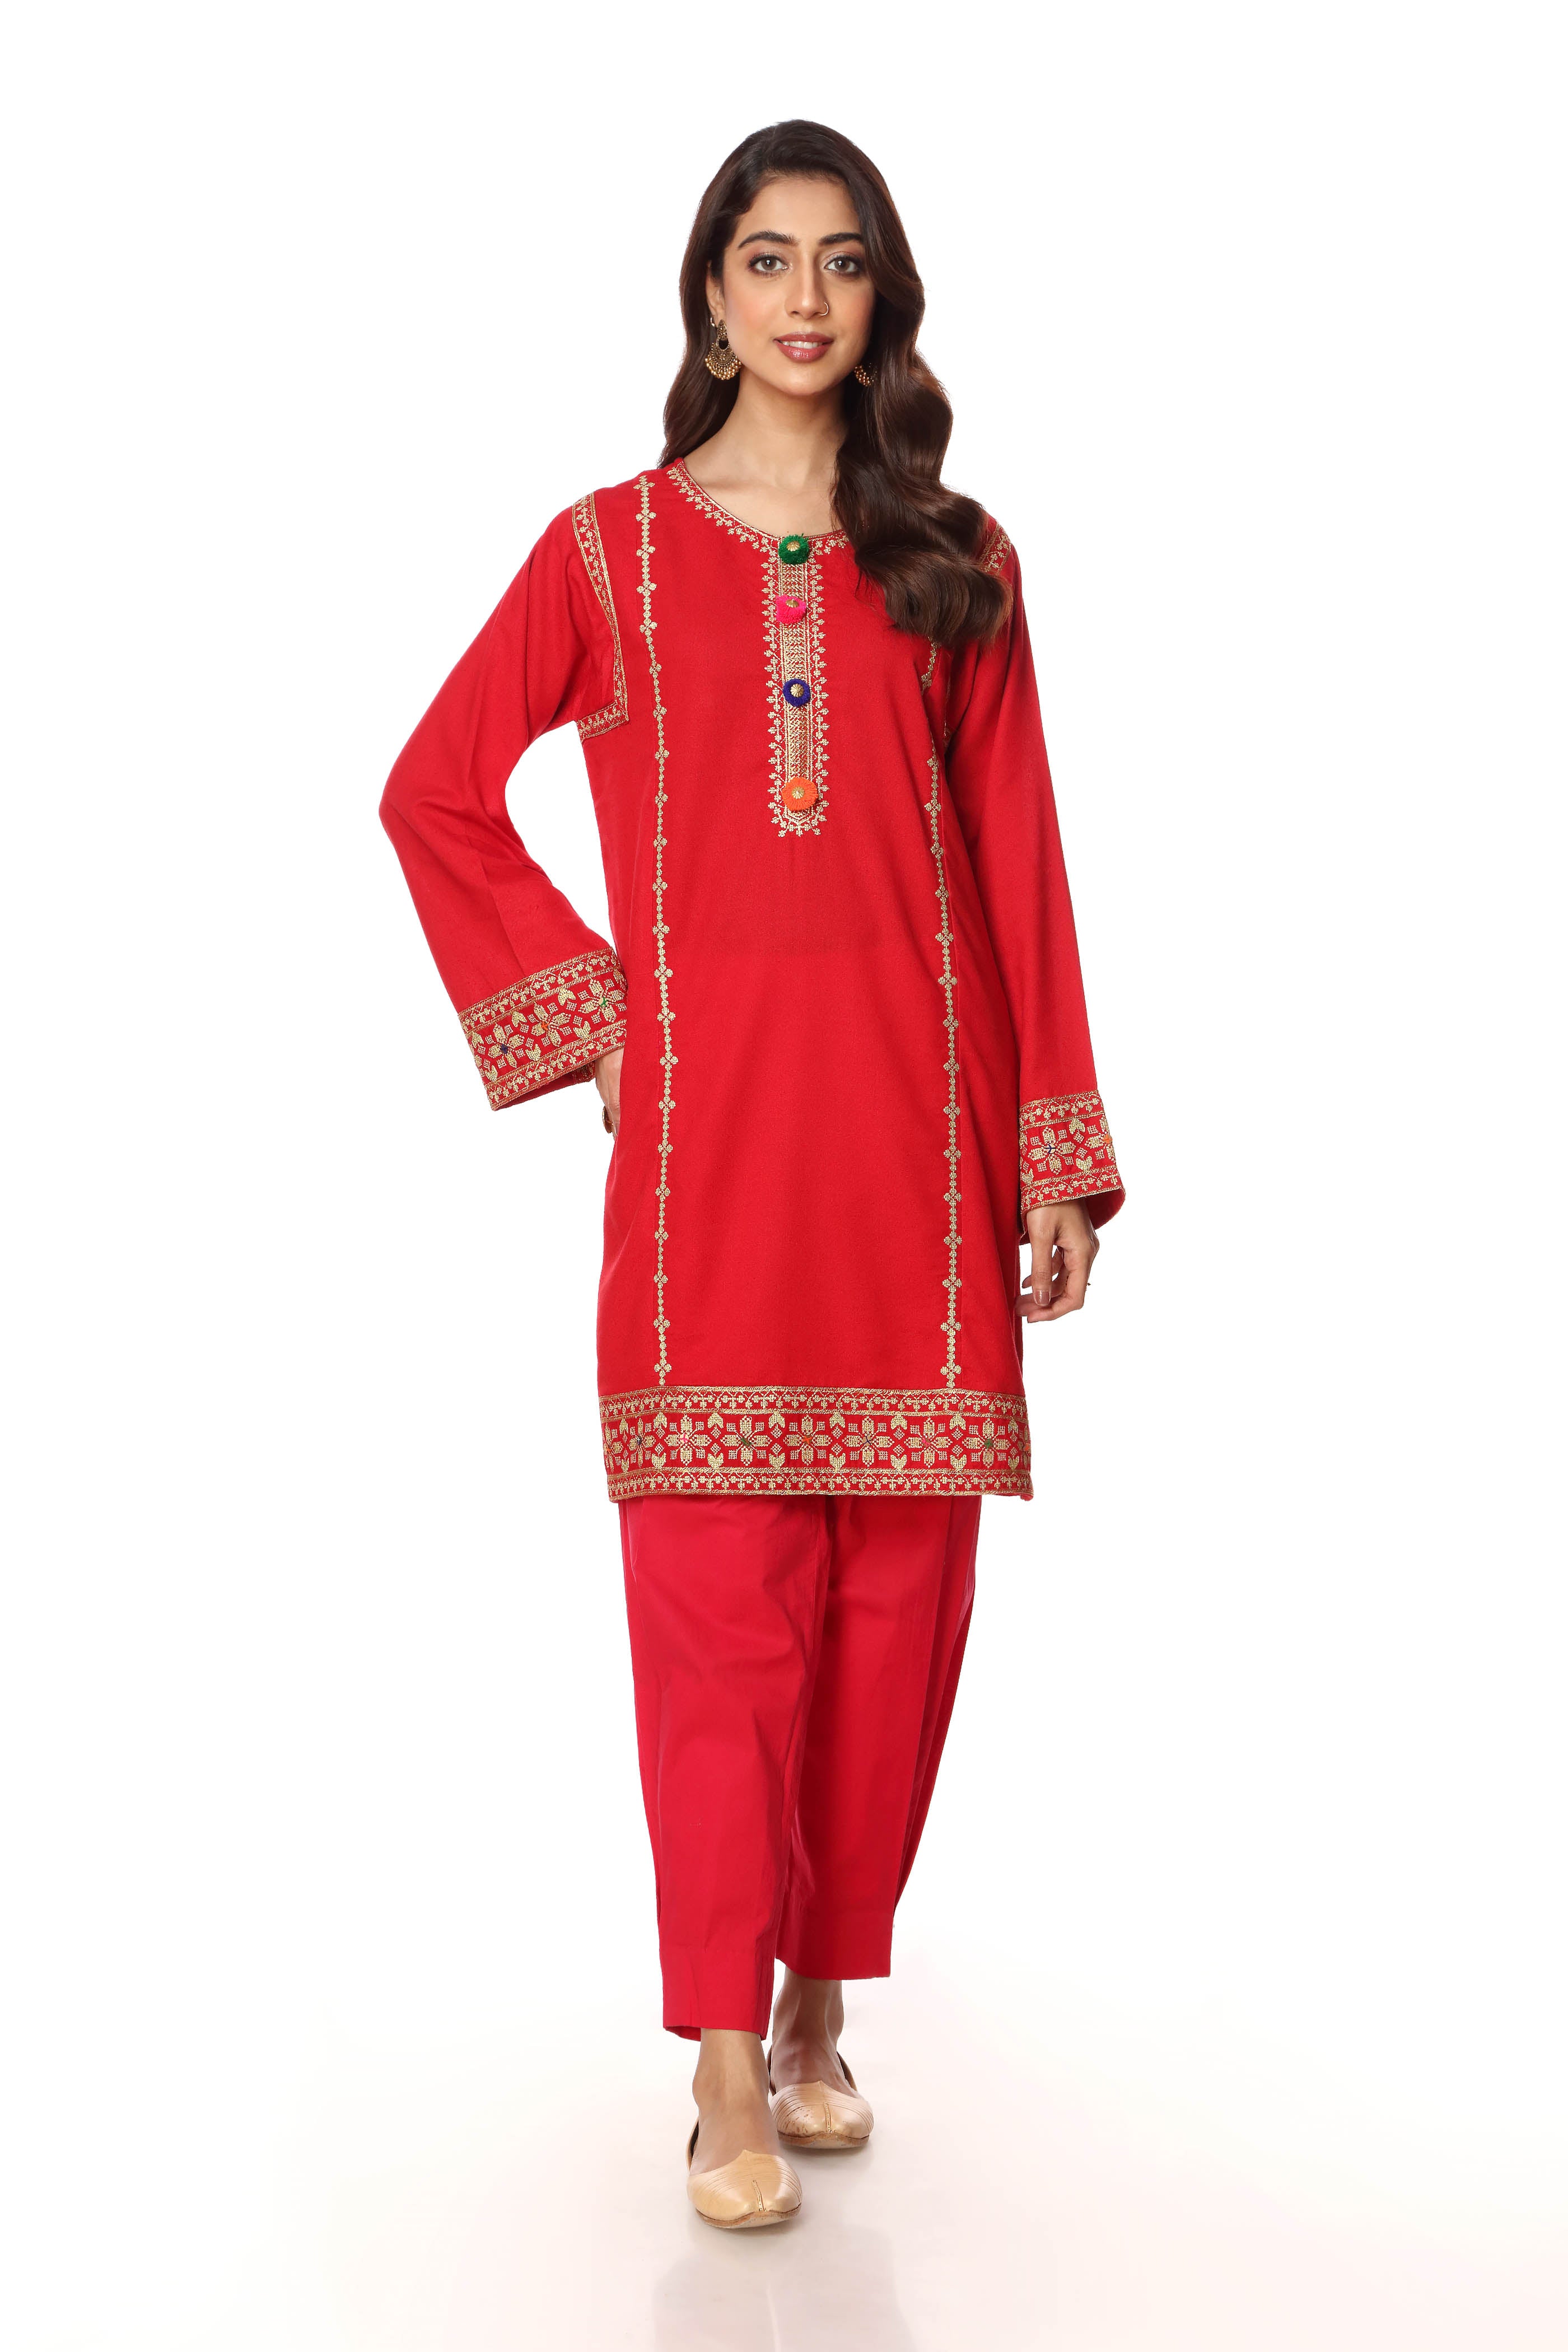 Ethnic Gold Sl in Red coloured Printed Lawn fabric